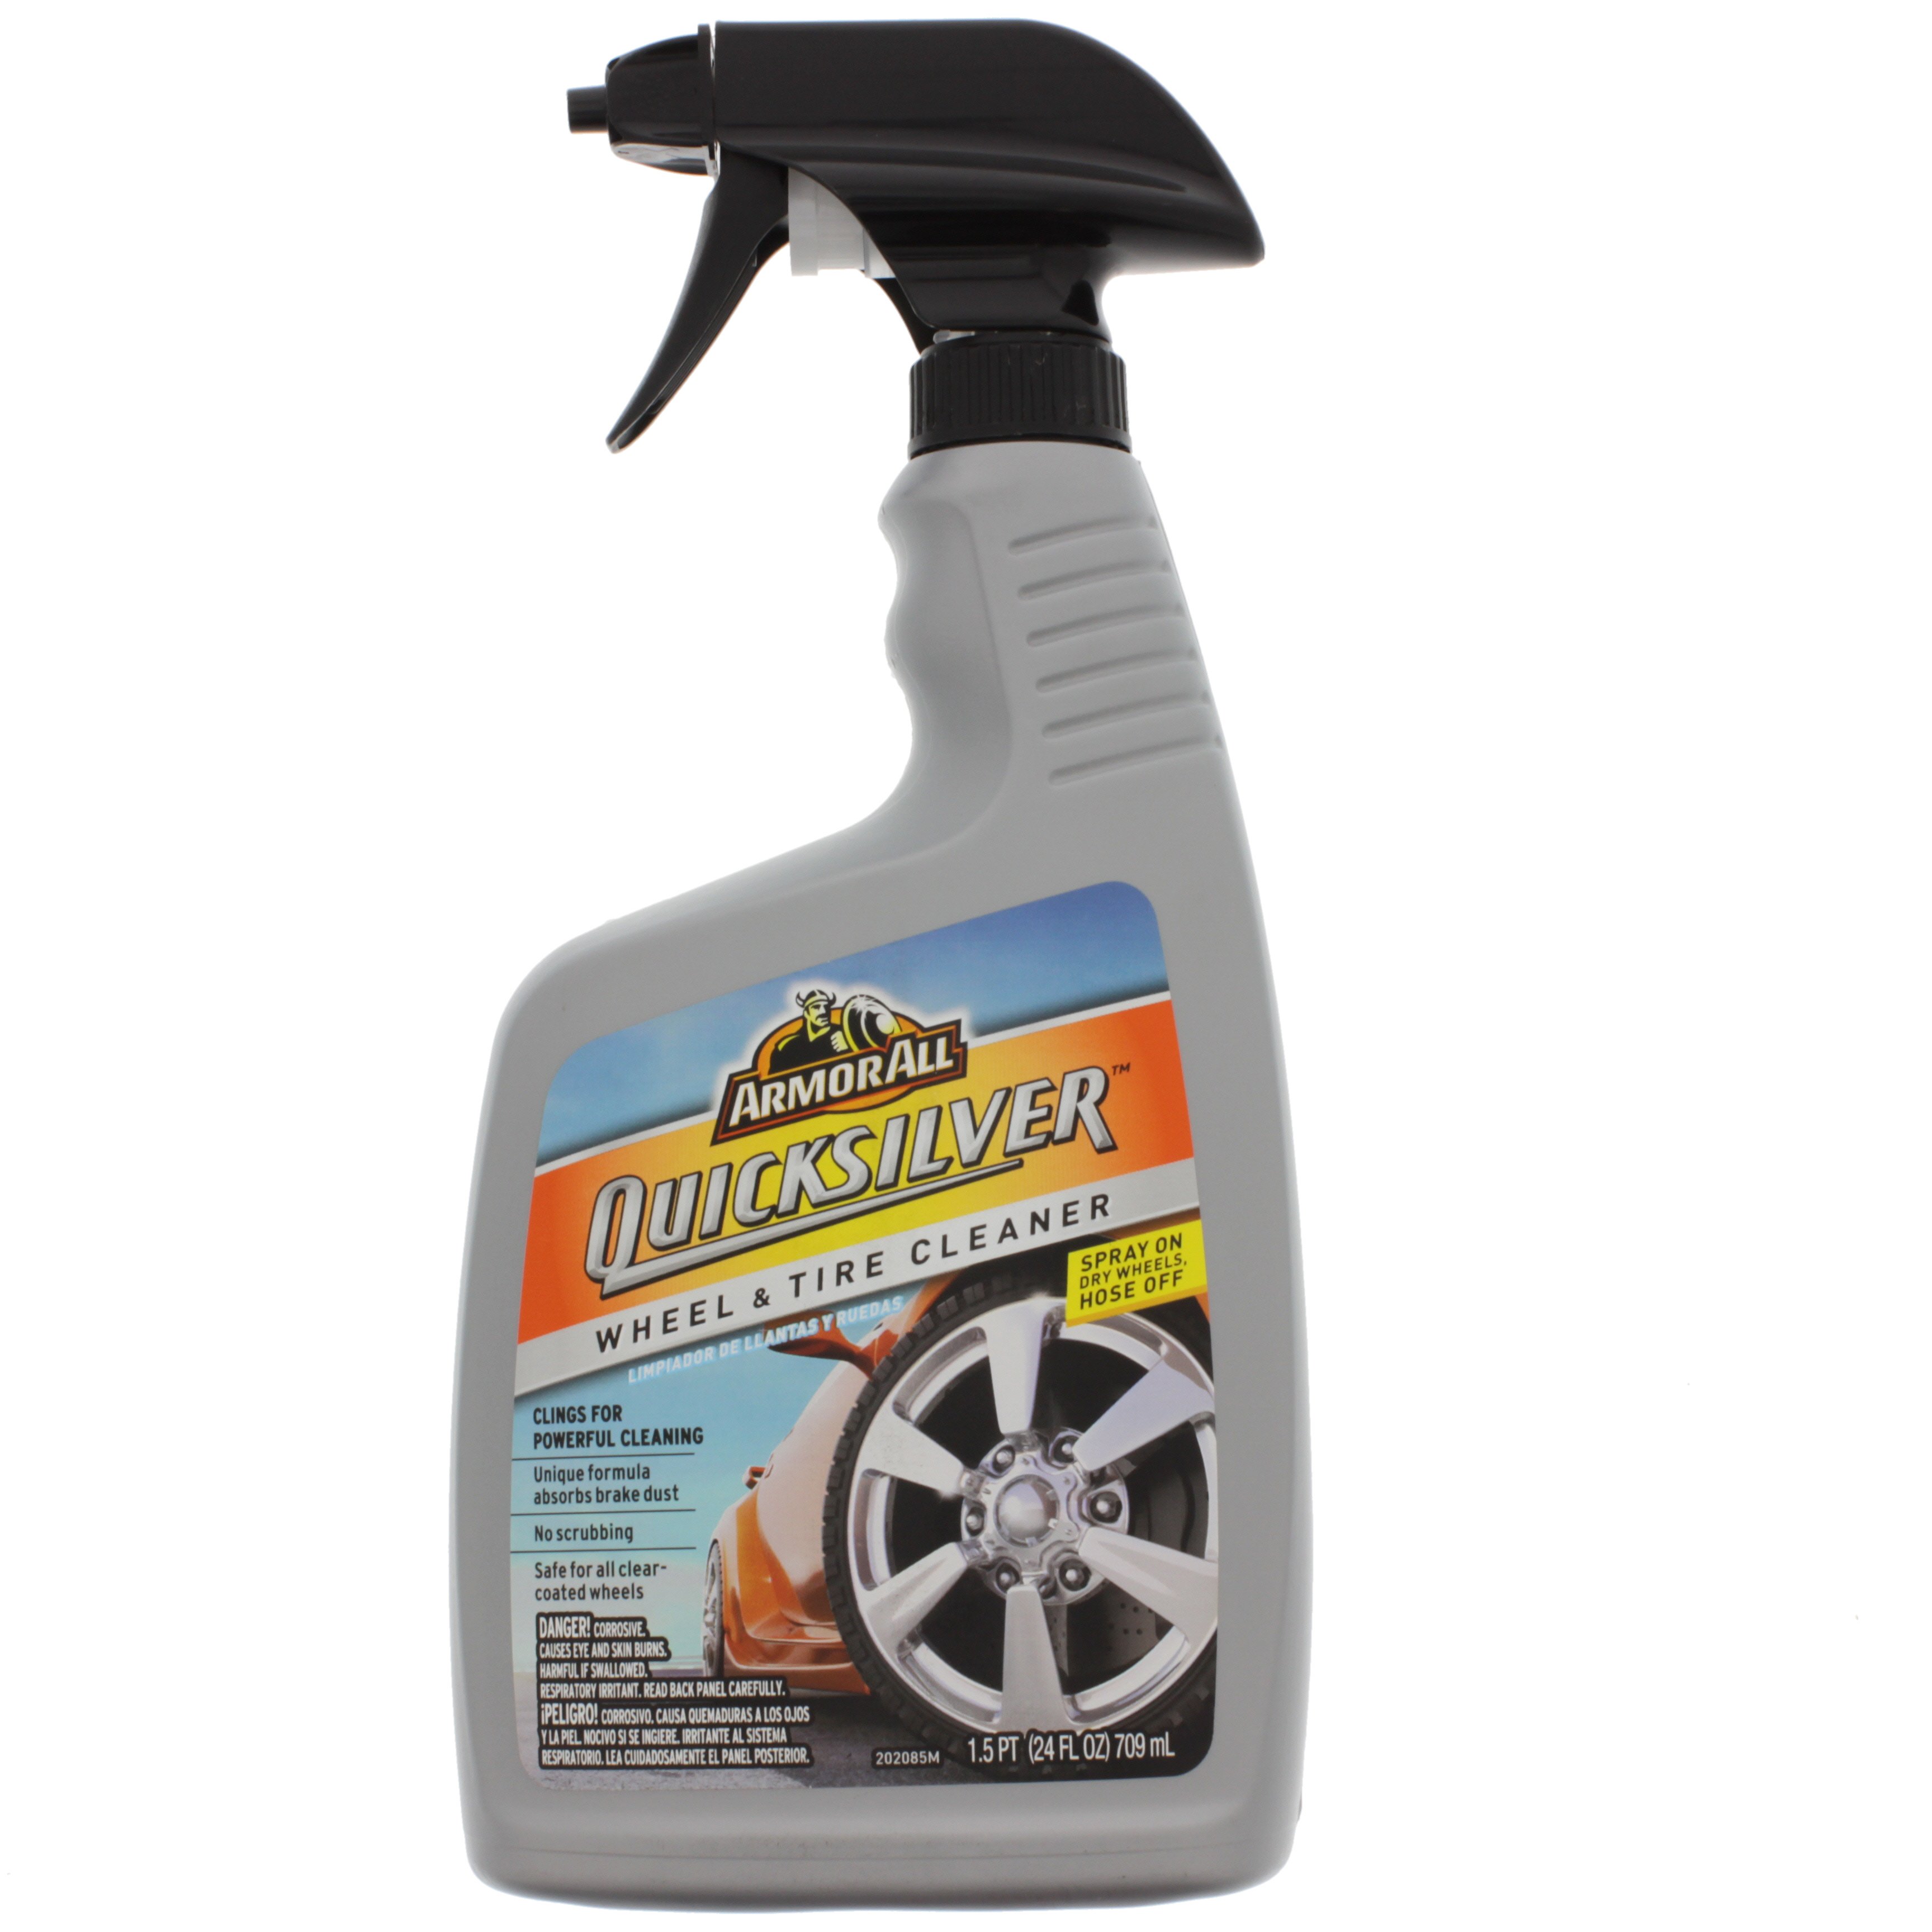 Armor All Extreme Tire Shine Aerosol - Shop Automotive Cleaners at H-E-B